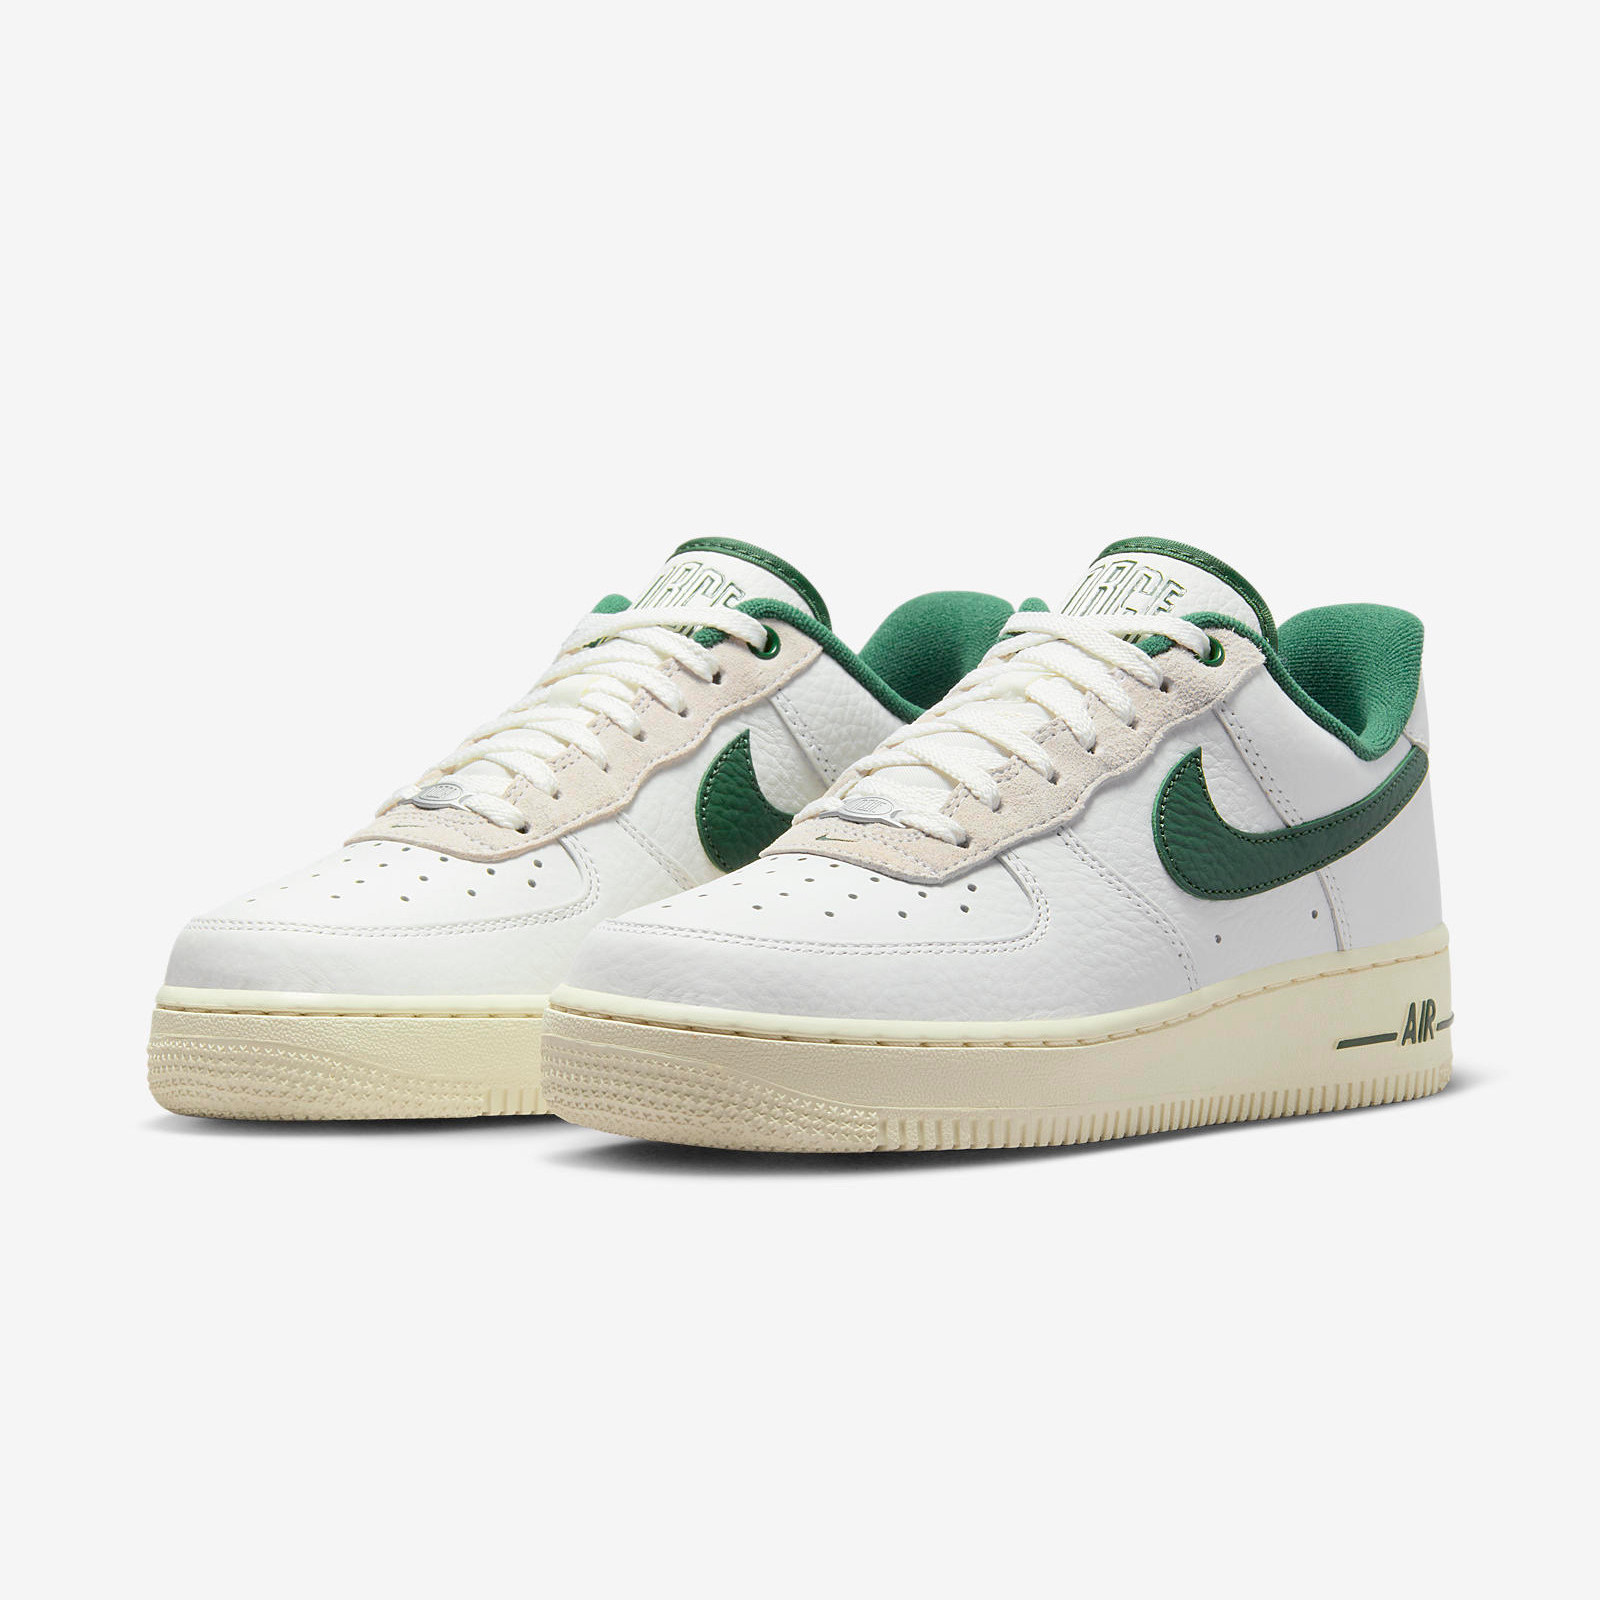 Nike Air Force 1 Low
White / Gorge Green